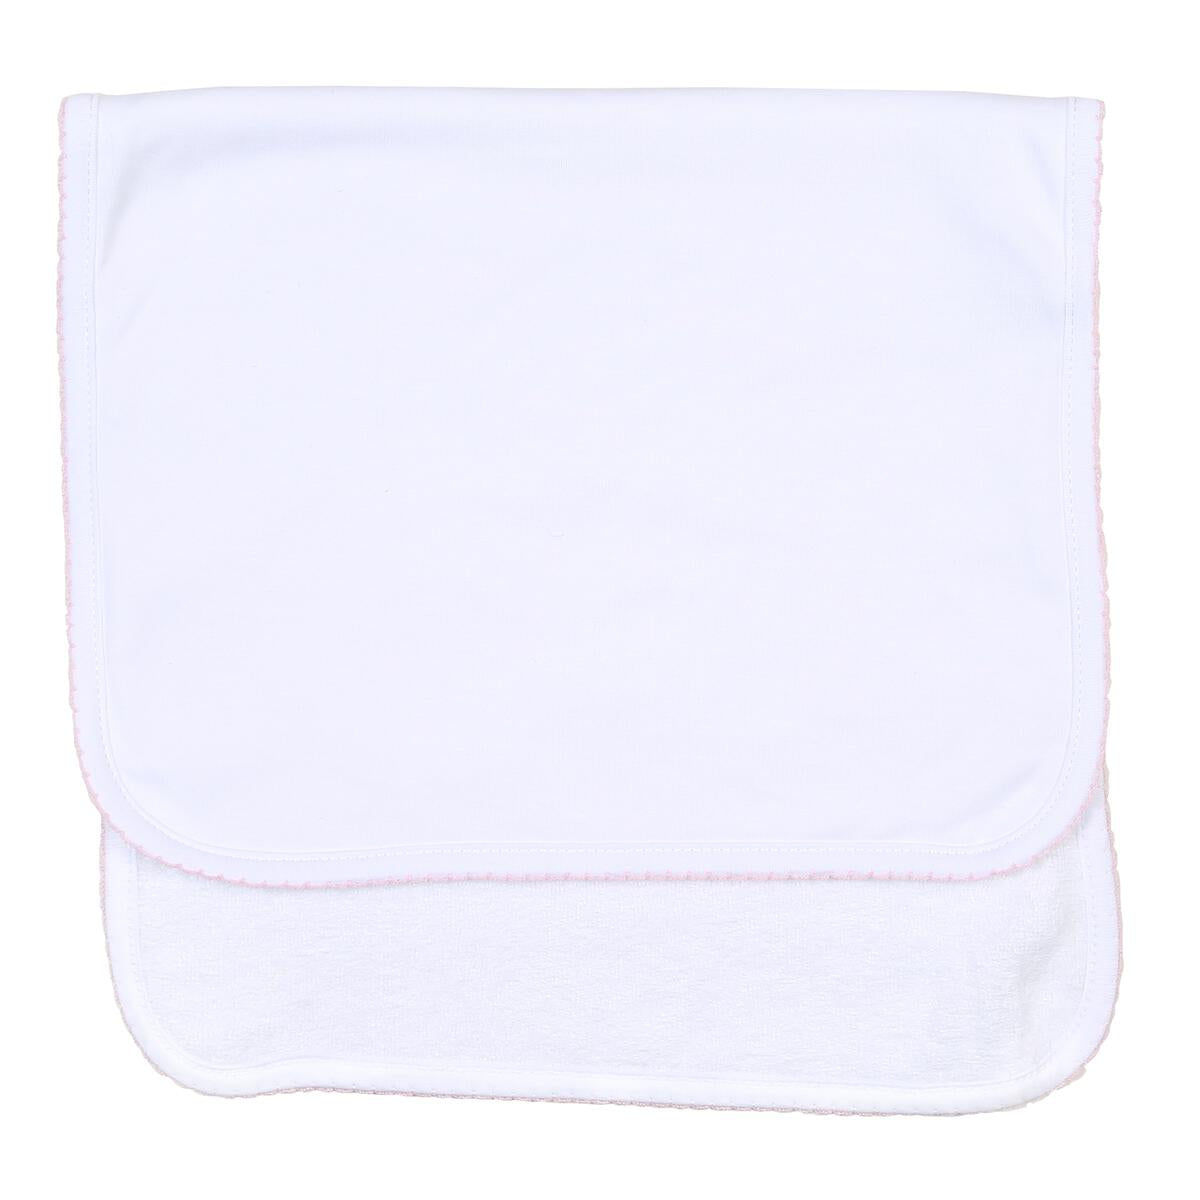 Magnolia Baby Essentials Burp Cloth - White with Pink